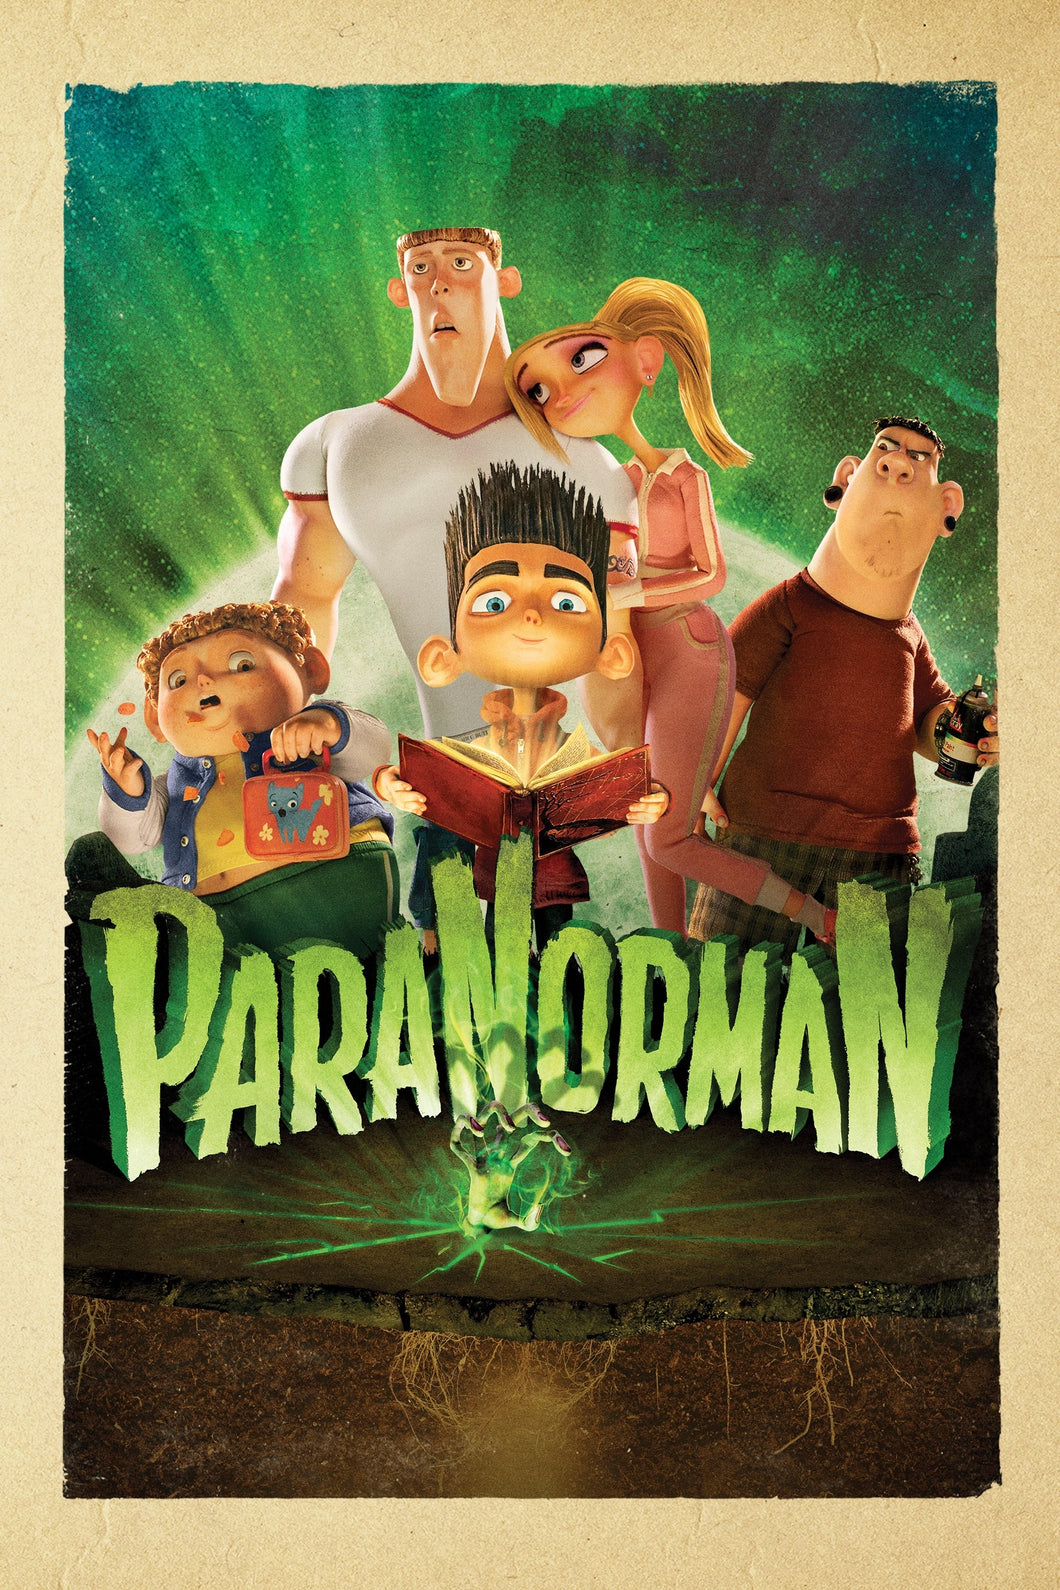 Paranorman (2012) Animated Movie Poster Framed or Unframed Glossy Poster Free UK Shipping!!!